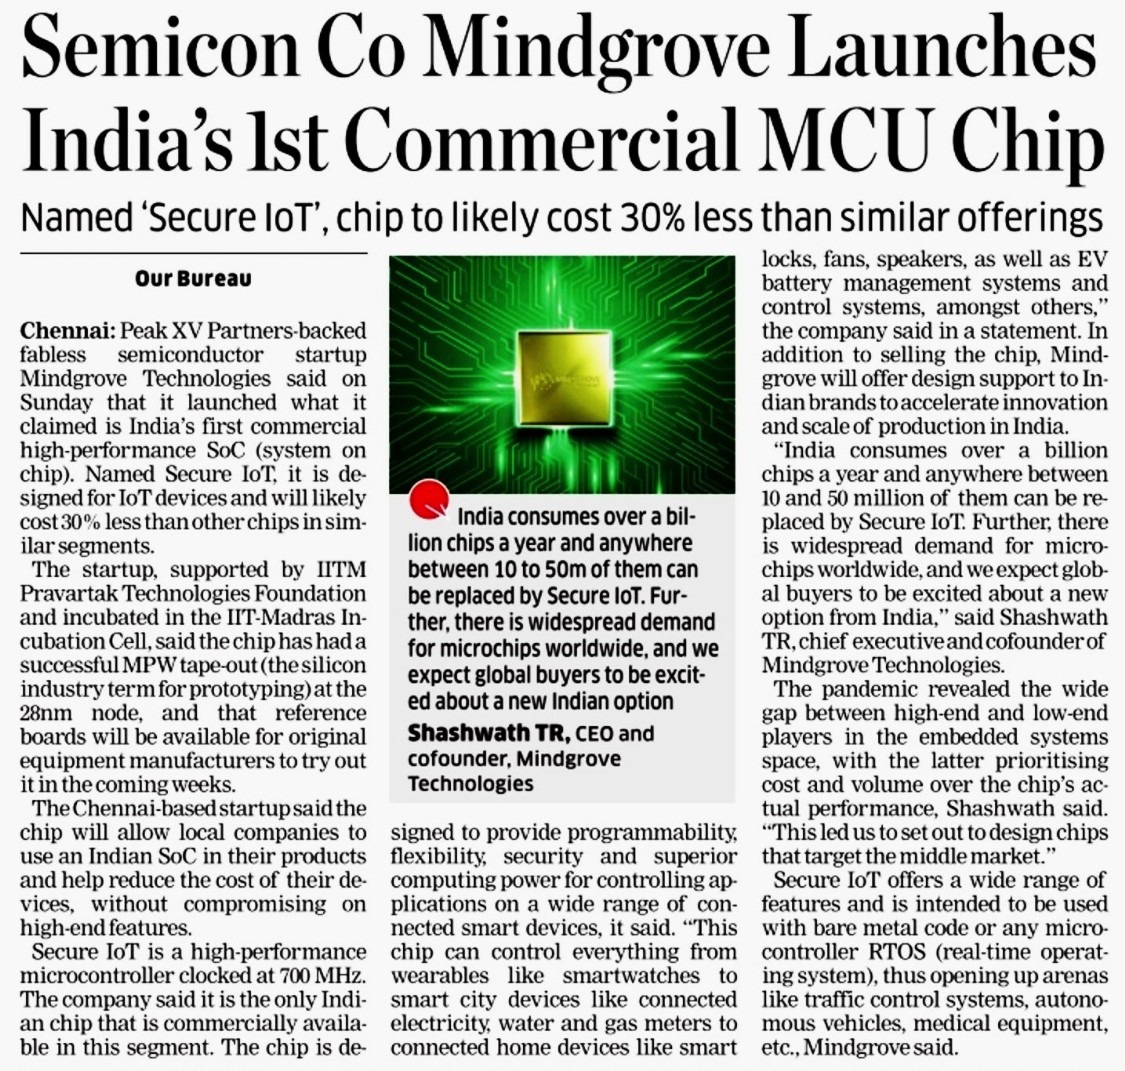 Big day for India today! @shashwath, Sharan & @MindgroveTech have launched the country's first commercial high-performance chip designed, owned & marketed from India for IoT devices. Huge privilege for Peak XV & @_surgeahead to partner with them🚀 #IndiaToTheWorld #semiconductor